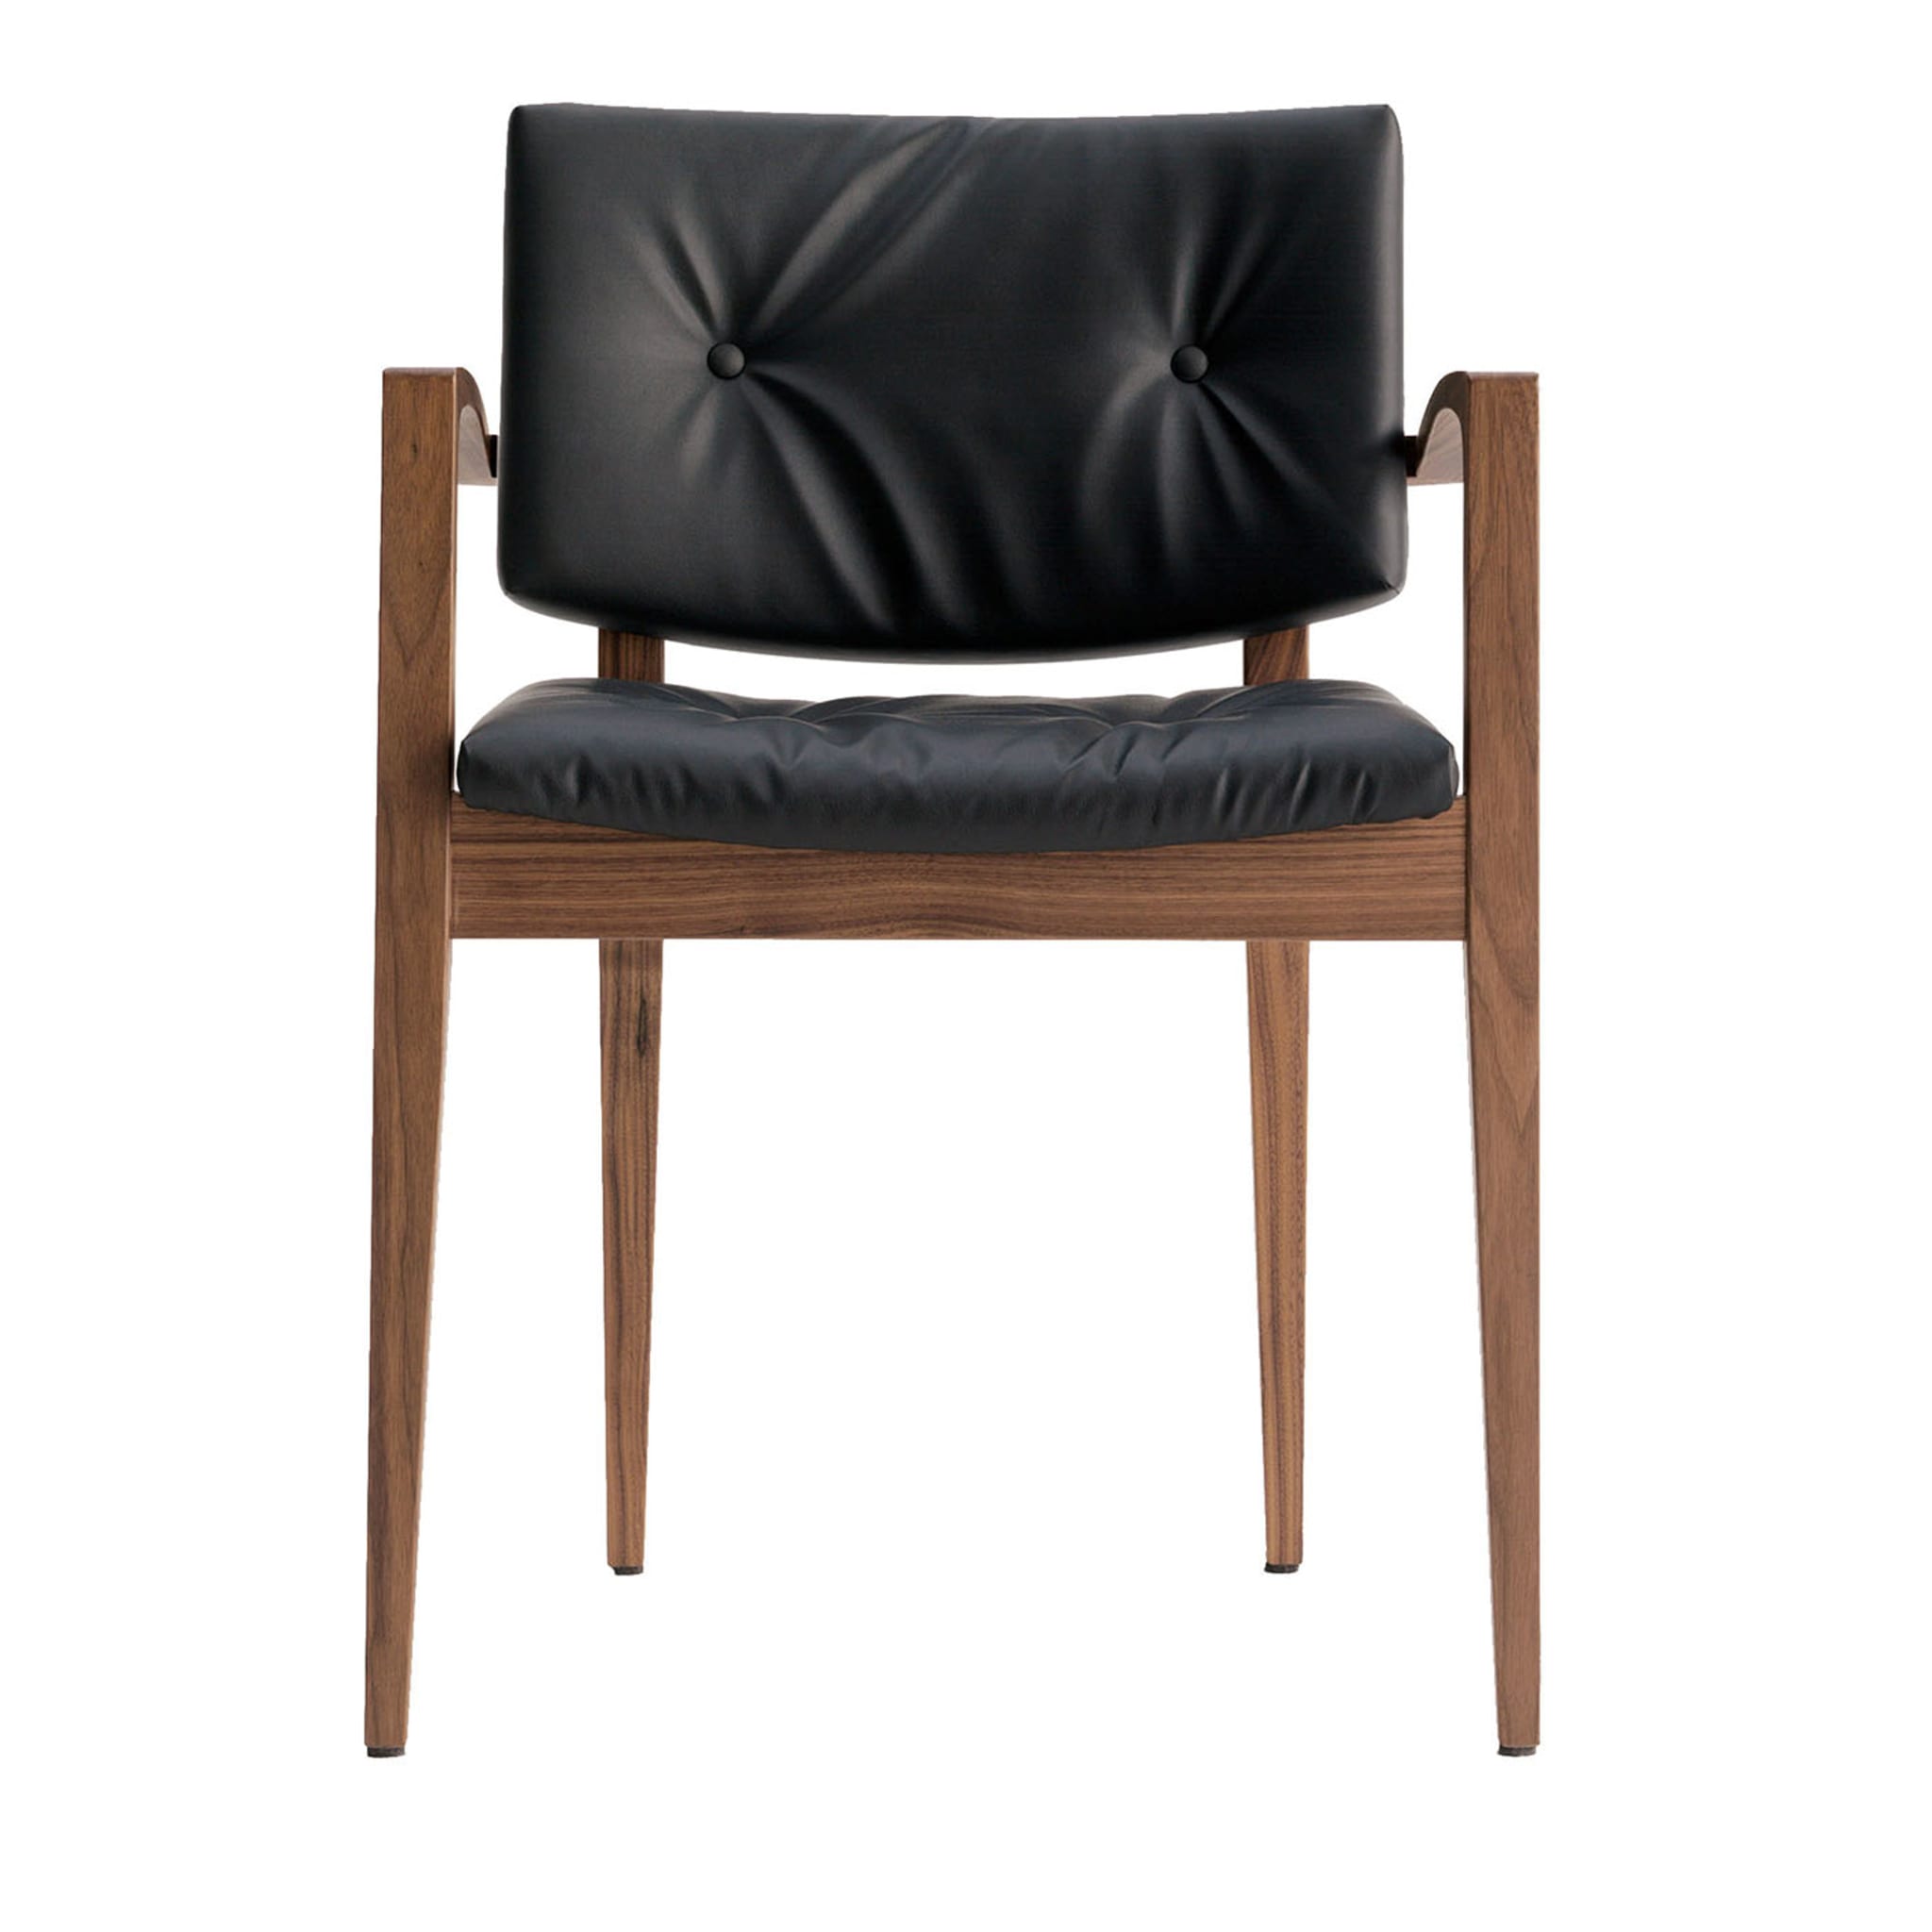 Eileen Small Brown & Black Armchair by Werther Toffoloni - Main view